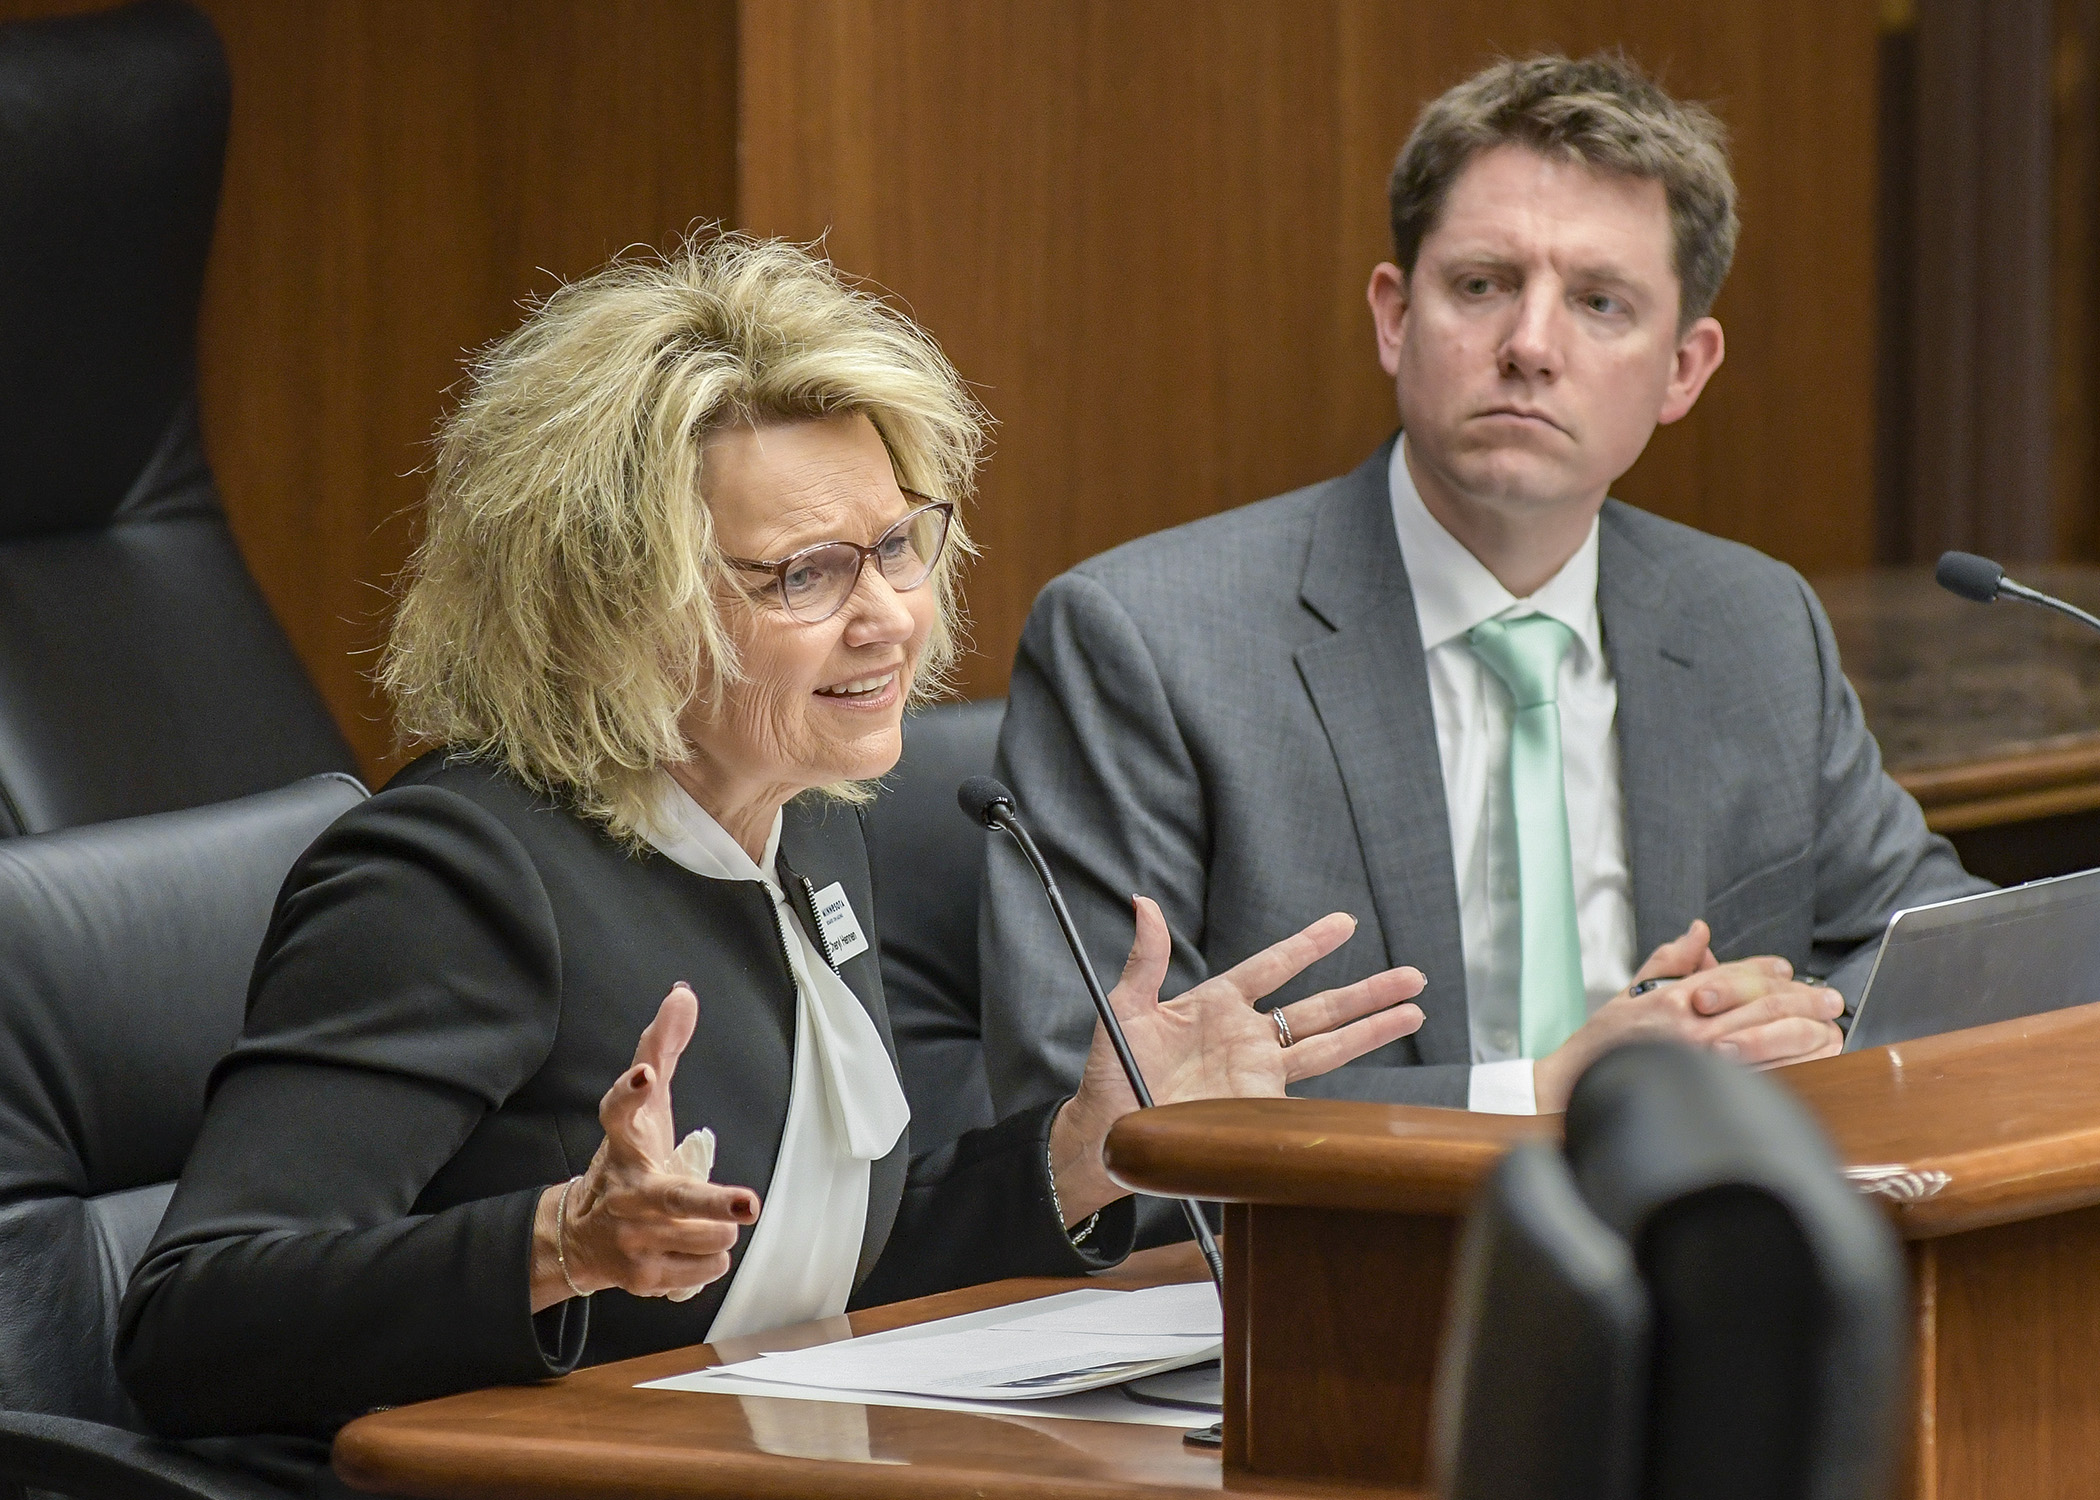 Cheryl Hennen, state ombudsman for long-term care, testifies before the House Long-Term Care Division March 4 in support of a bill sponsored by Rep. Todd Lippert, right, that would provide long-term care ombudsman office funding. Photo by Andrew VonBank